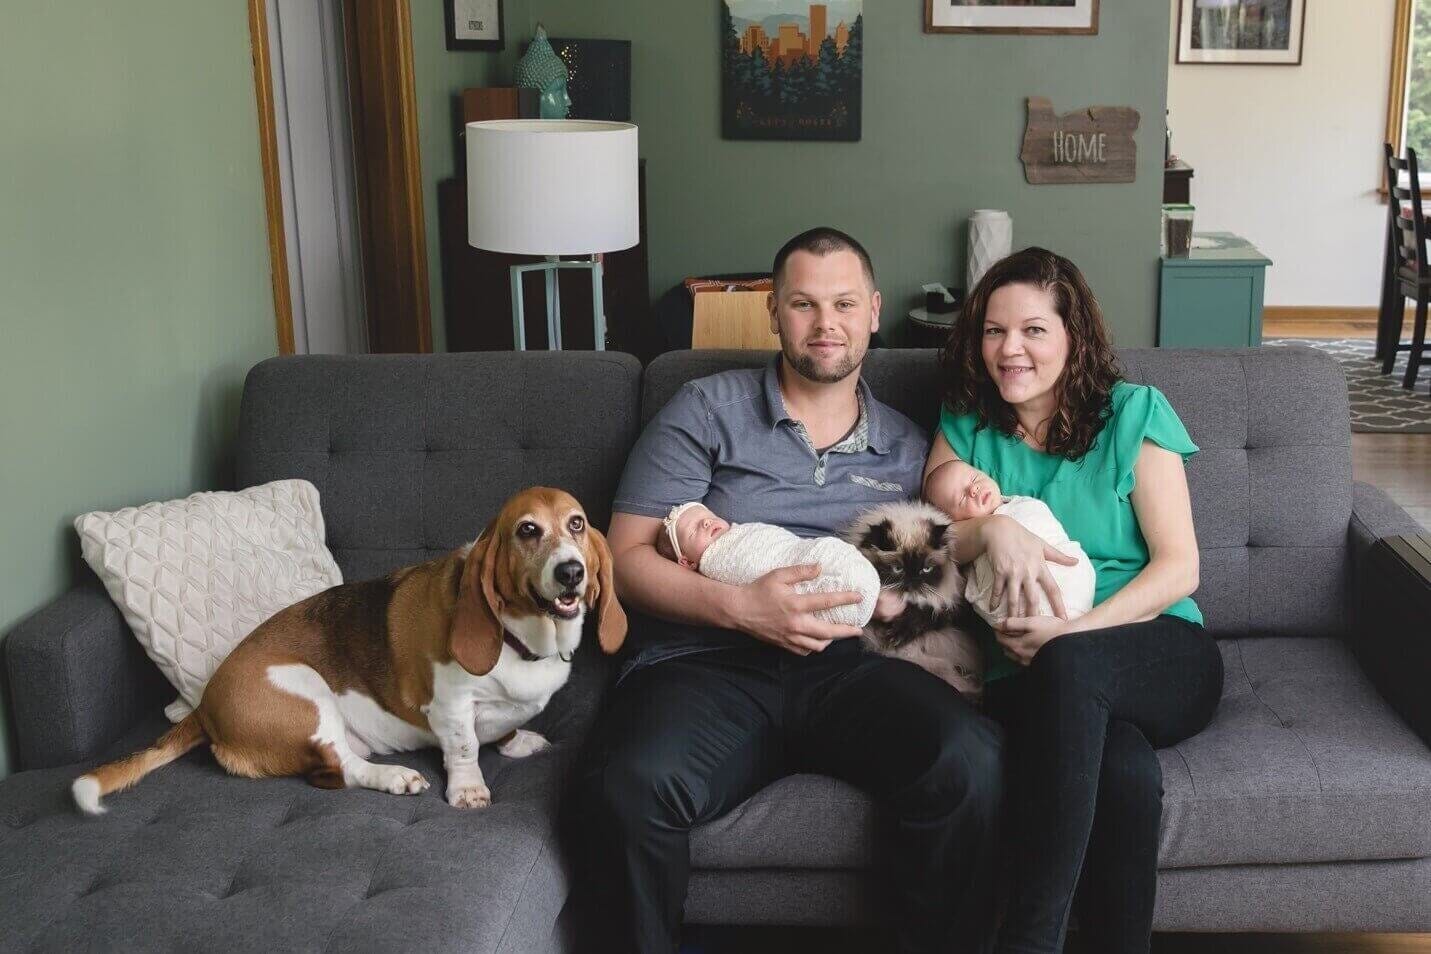 infertility warrior elizabeth osberger with her husband, twins, dog, and cat at home